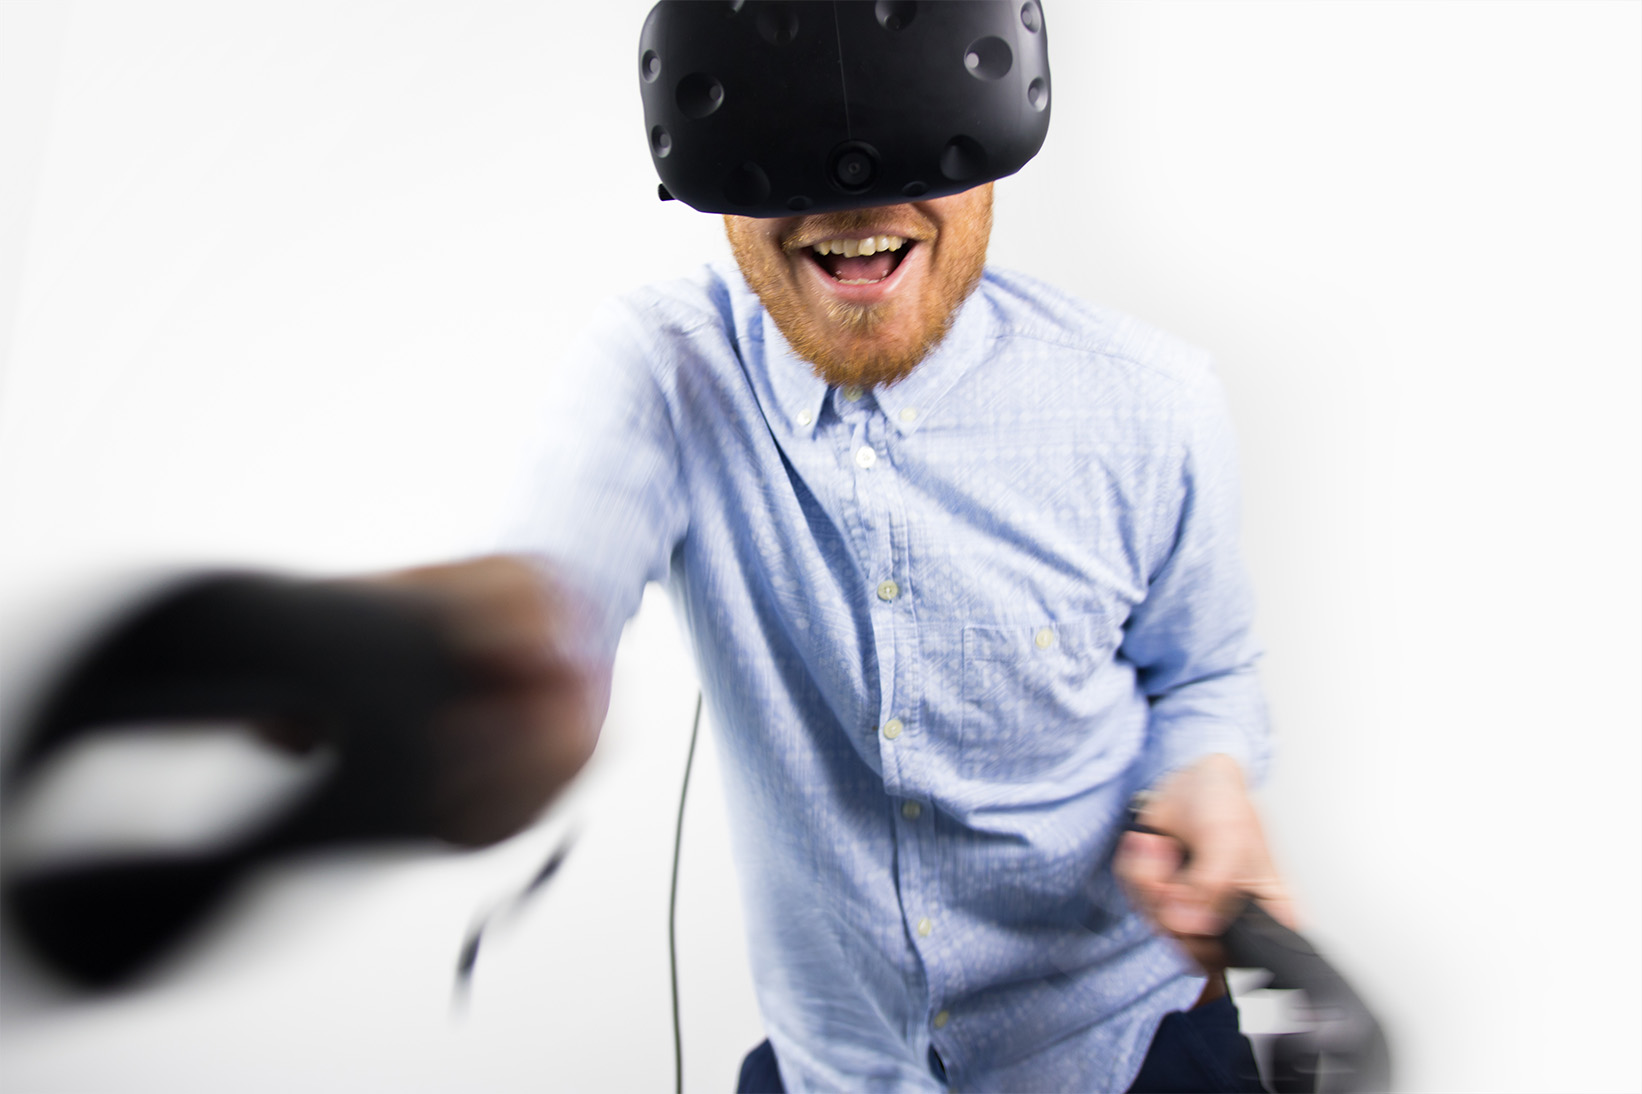 A person wearing a VR headset lunges towards the camera